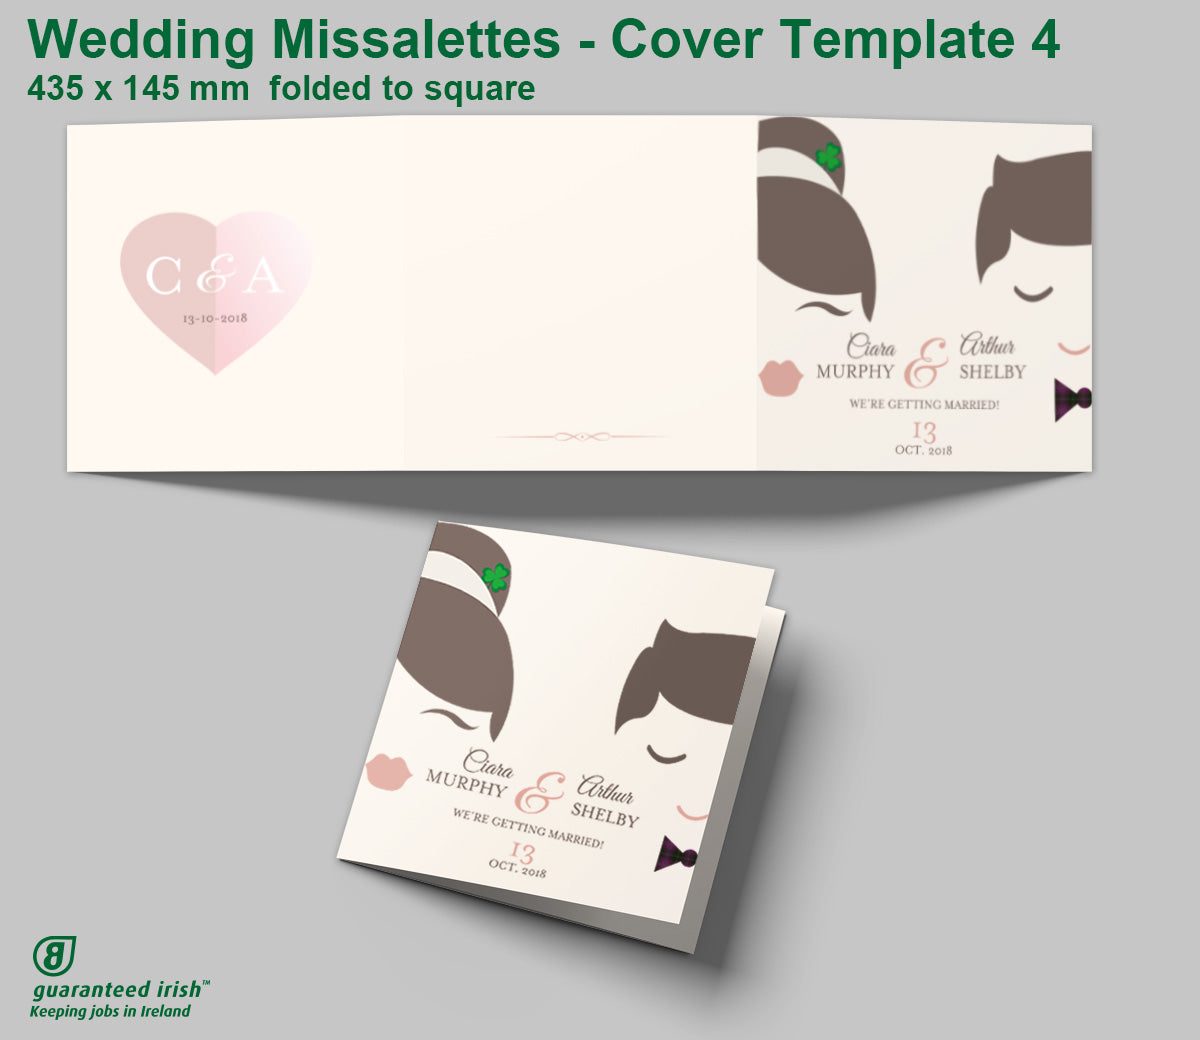 Wedding Missalettes - Cover Template 4